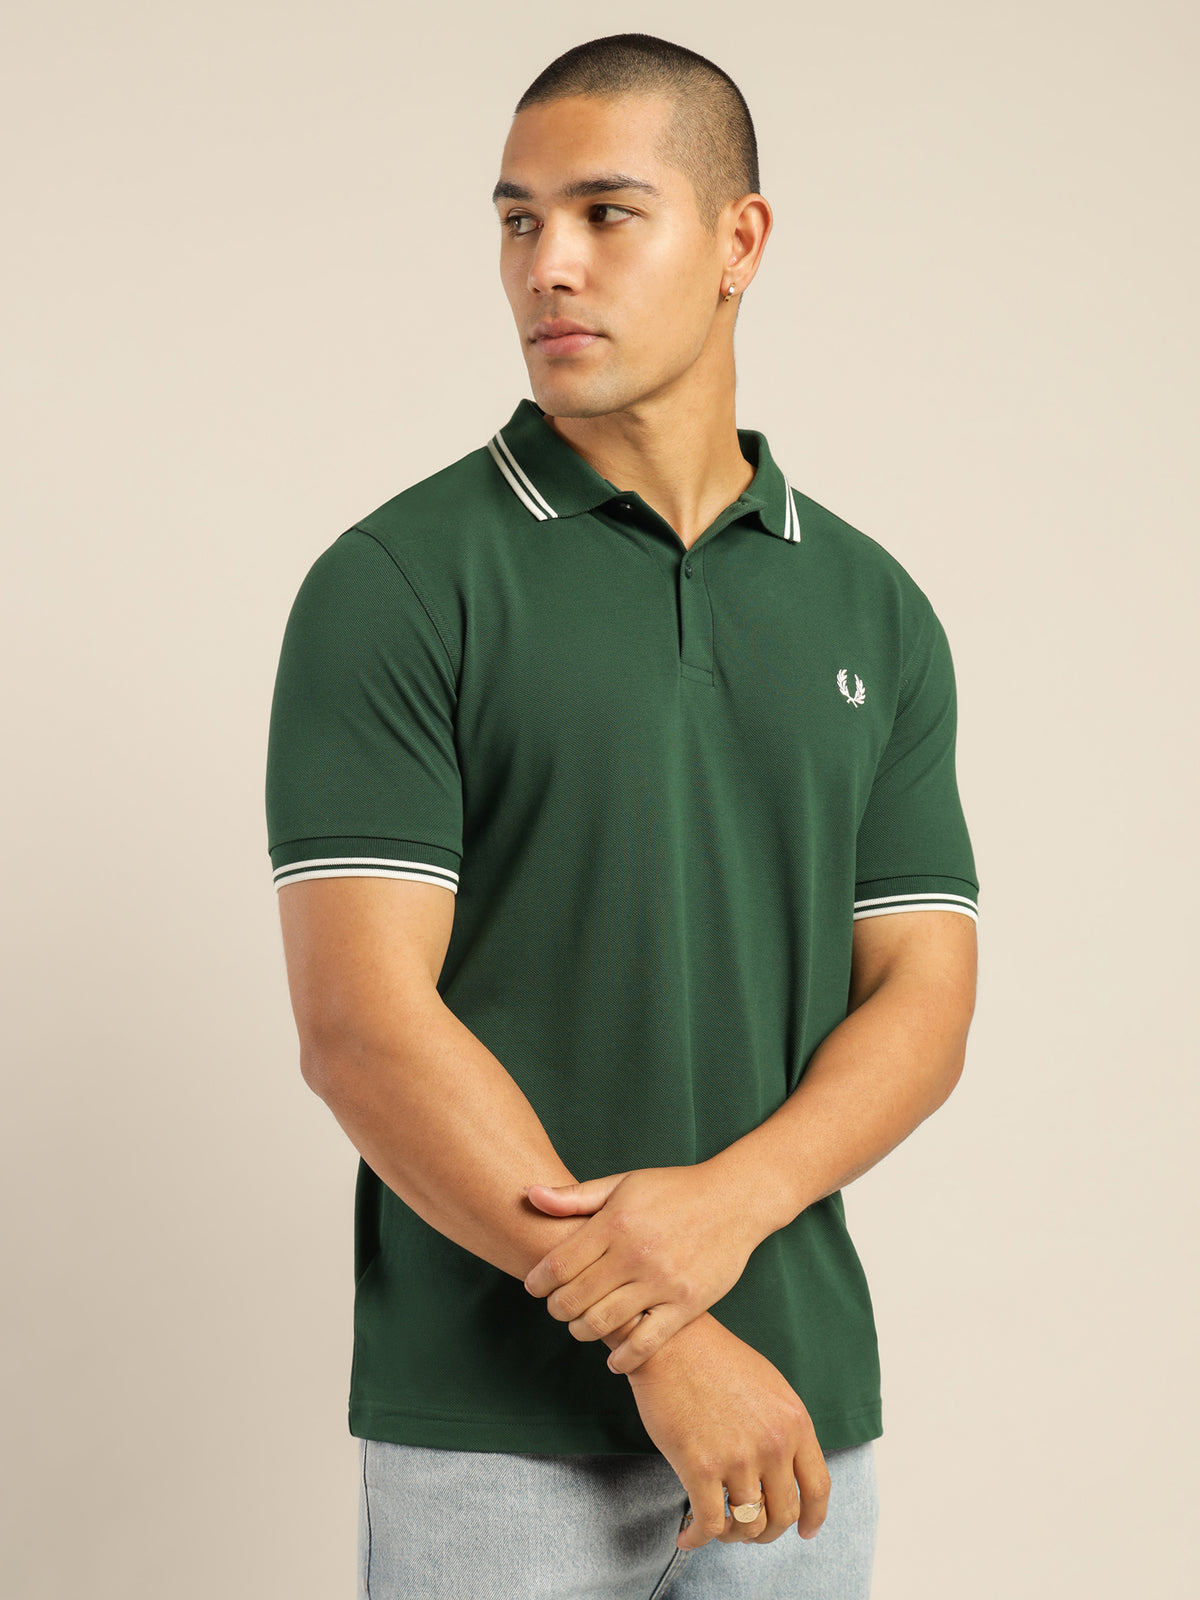 Twin Tipped Polo Shirt in Ivy